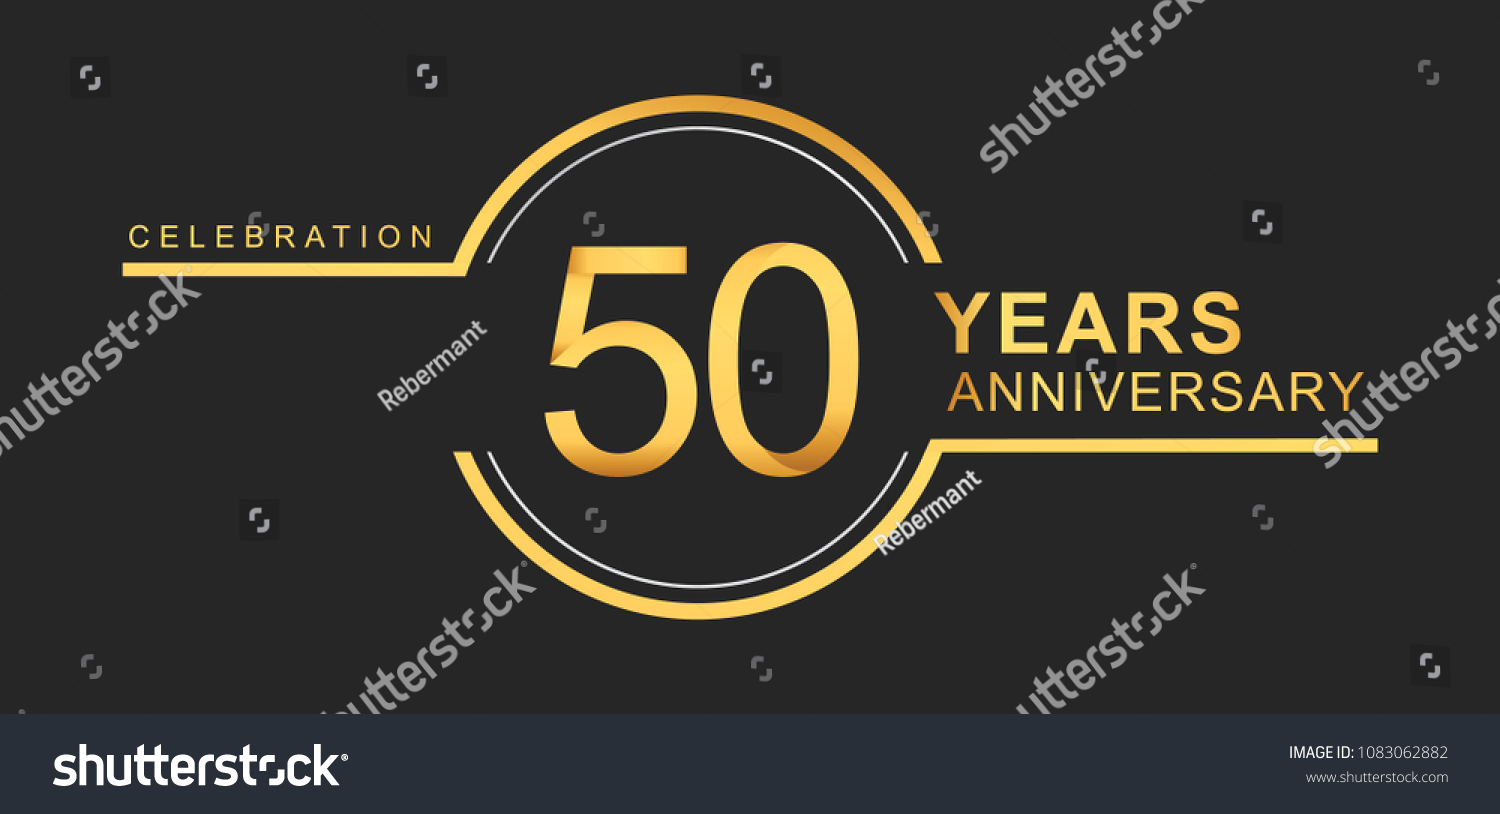 SVG of 50 years anniversary golden and silver color with circle ring isolated on black background for anniversary celebration event svg